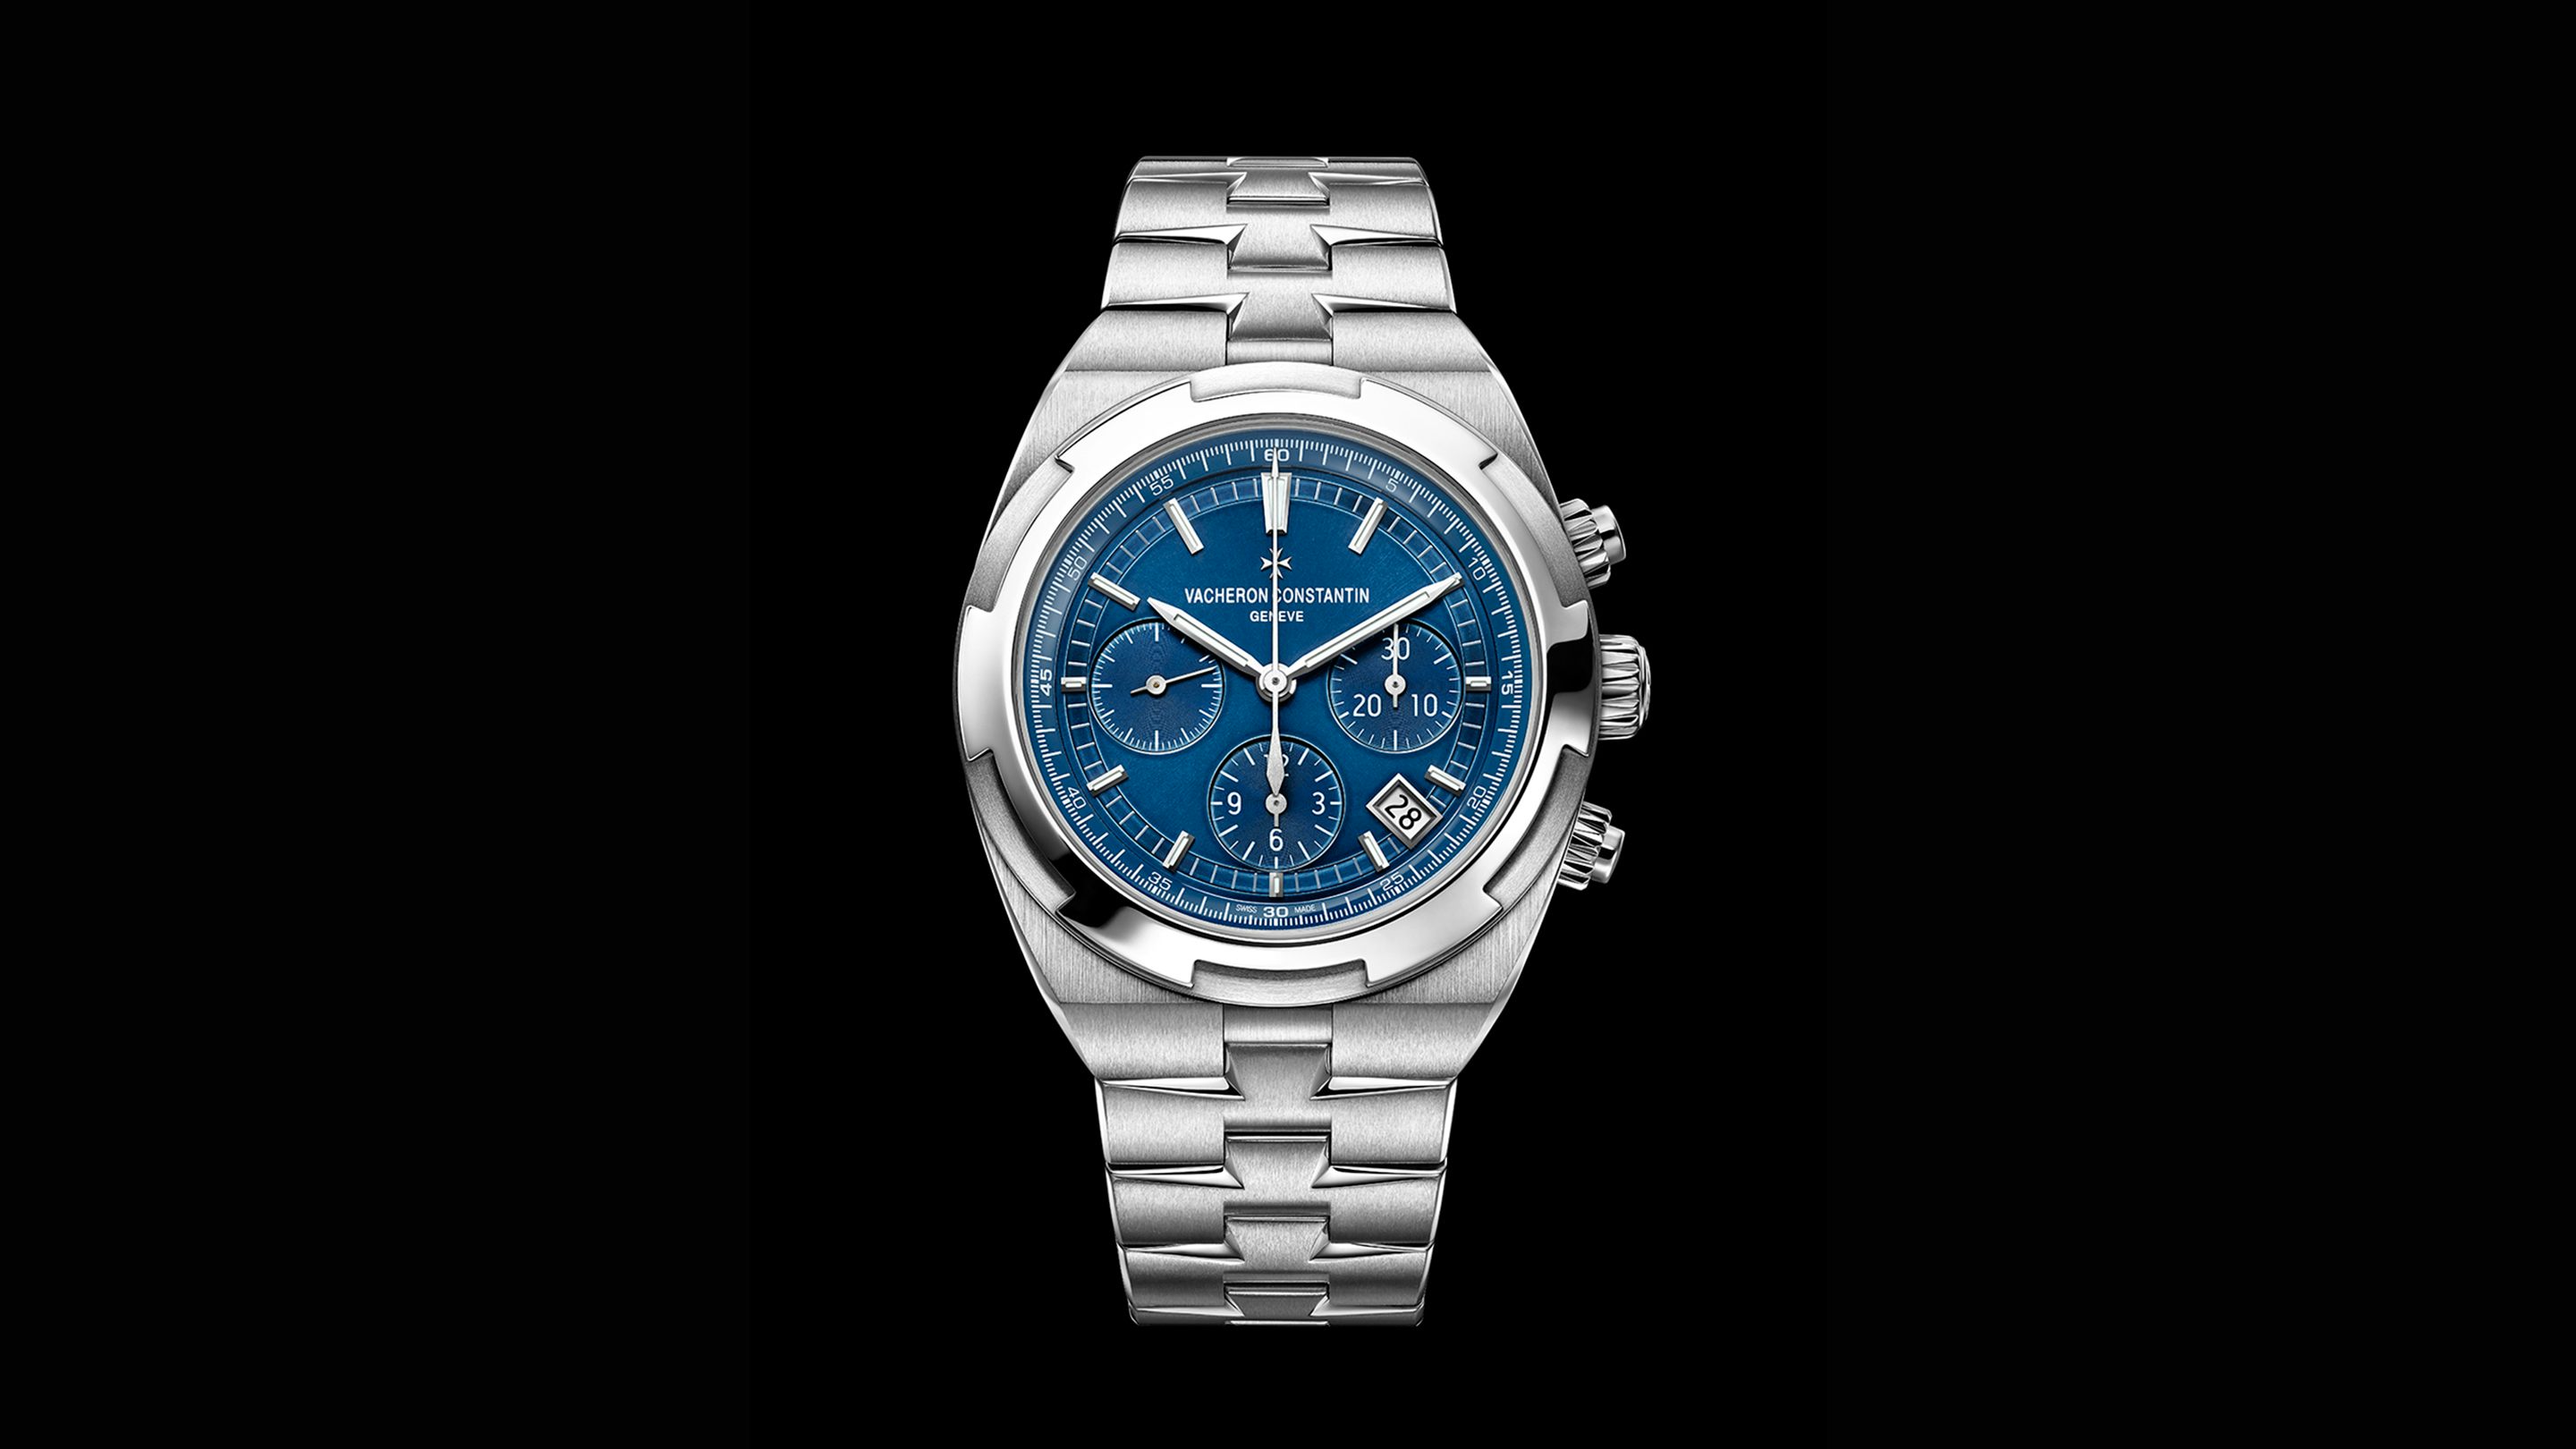 Please have a look at this truly beautiful blue Vacheron